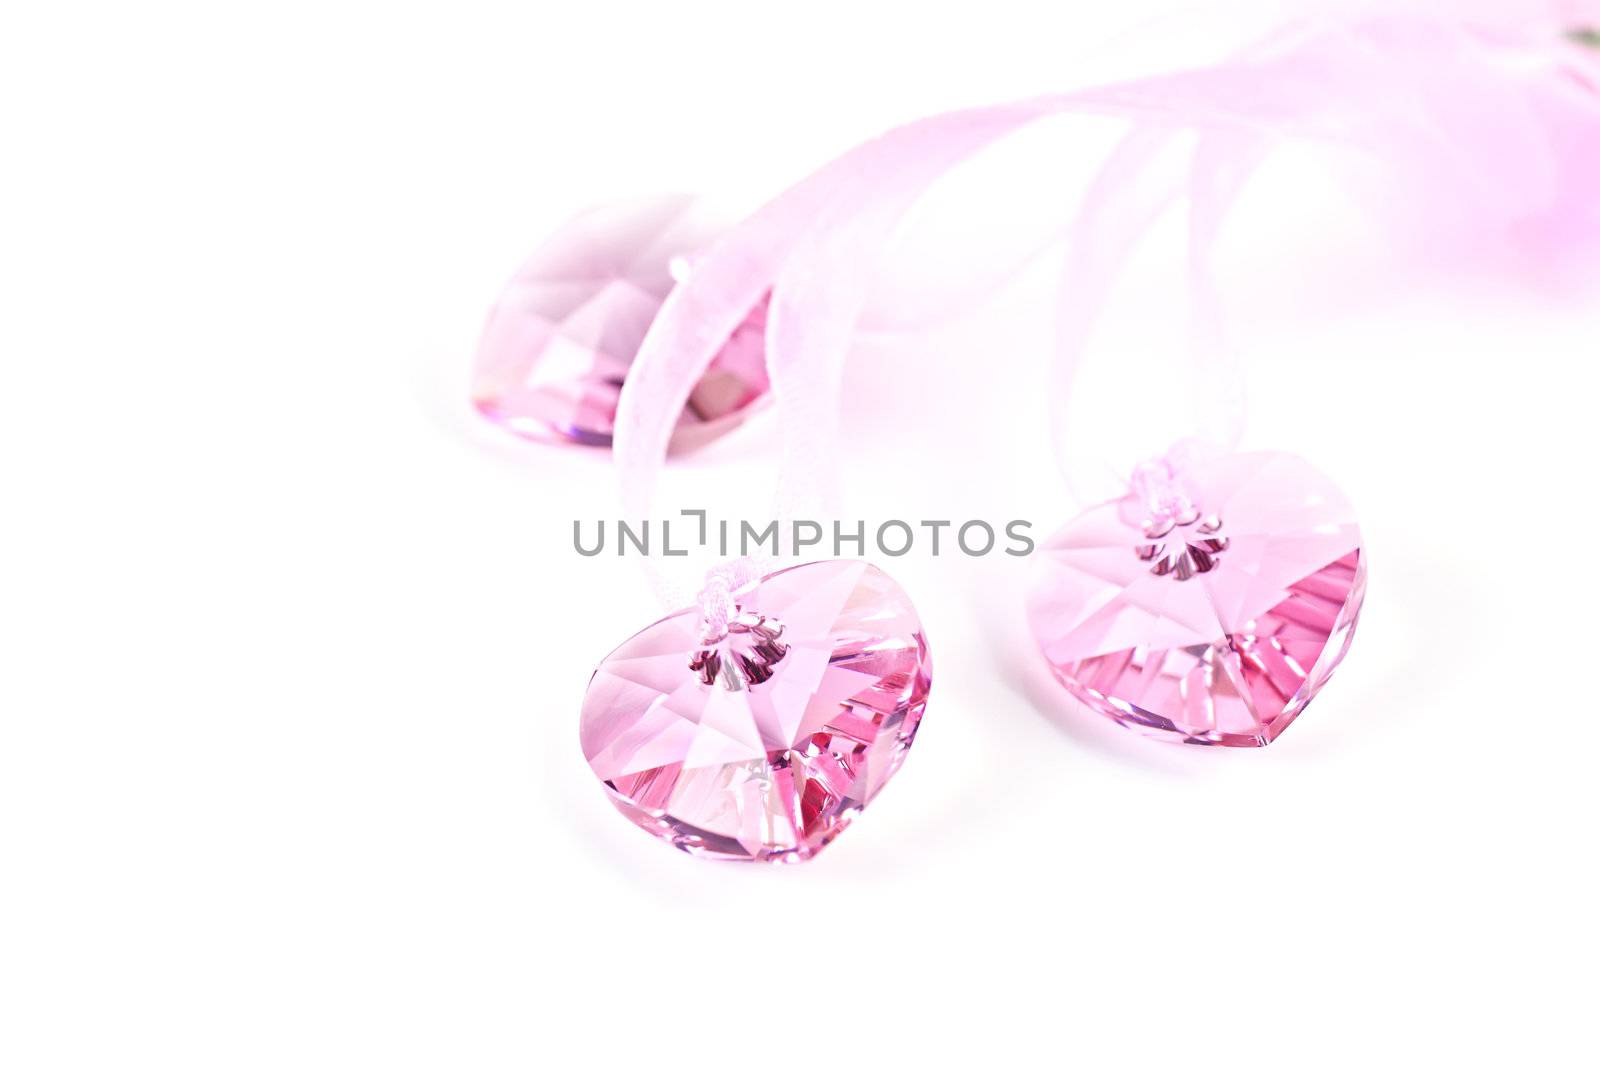 Three pink crystal hearts on a white background.